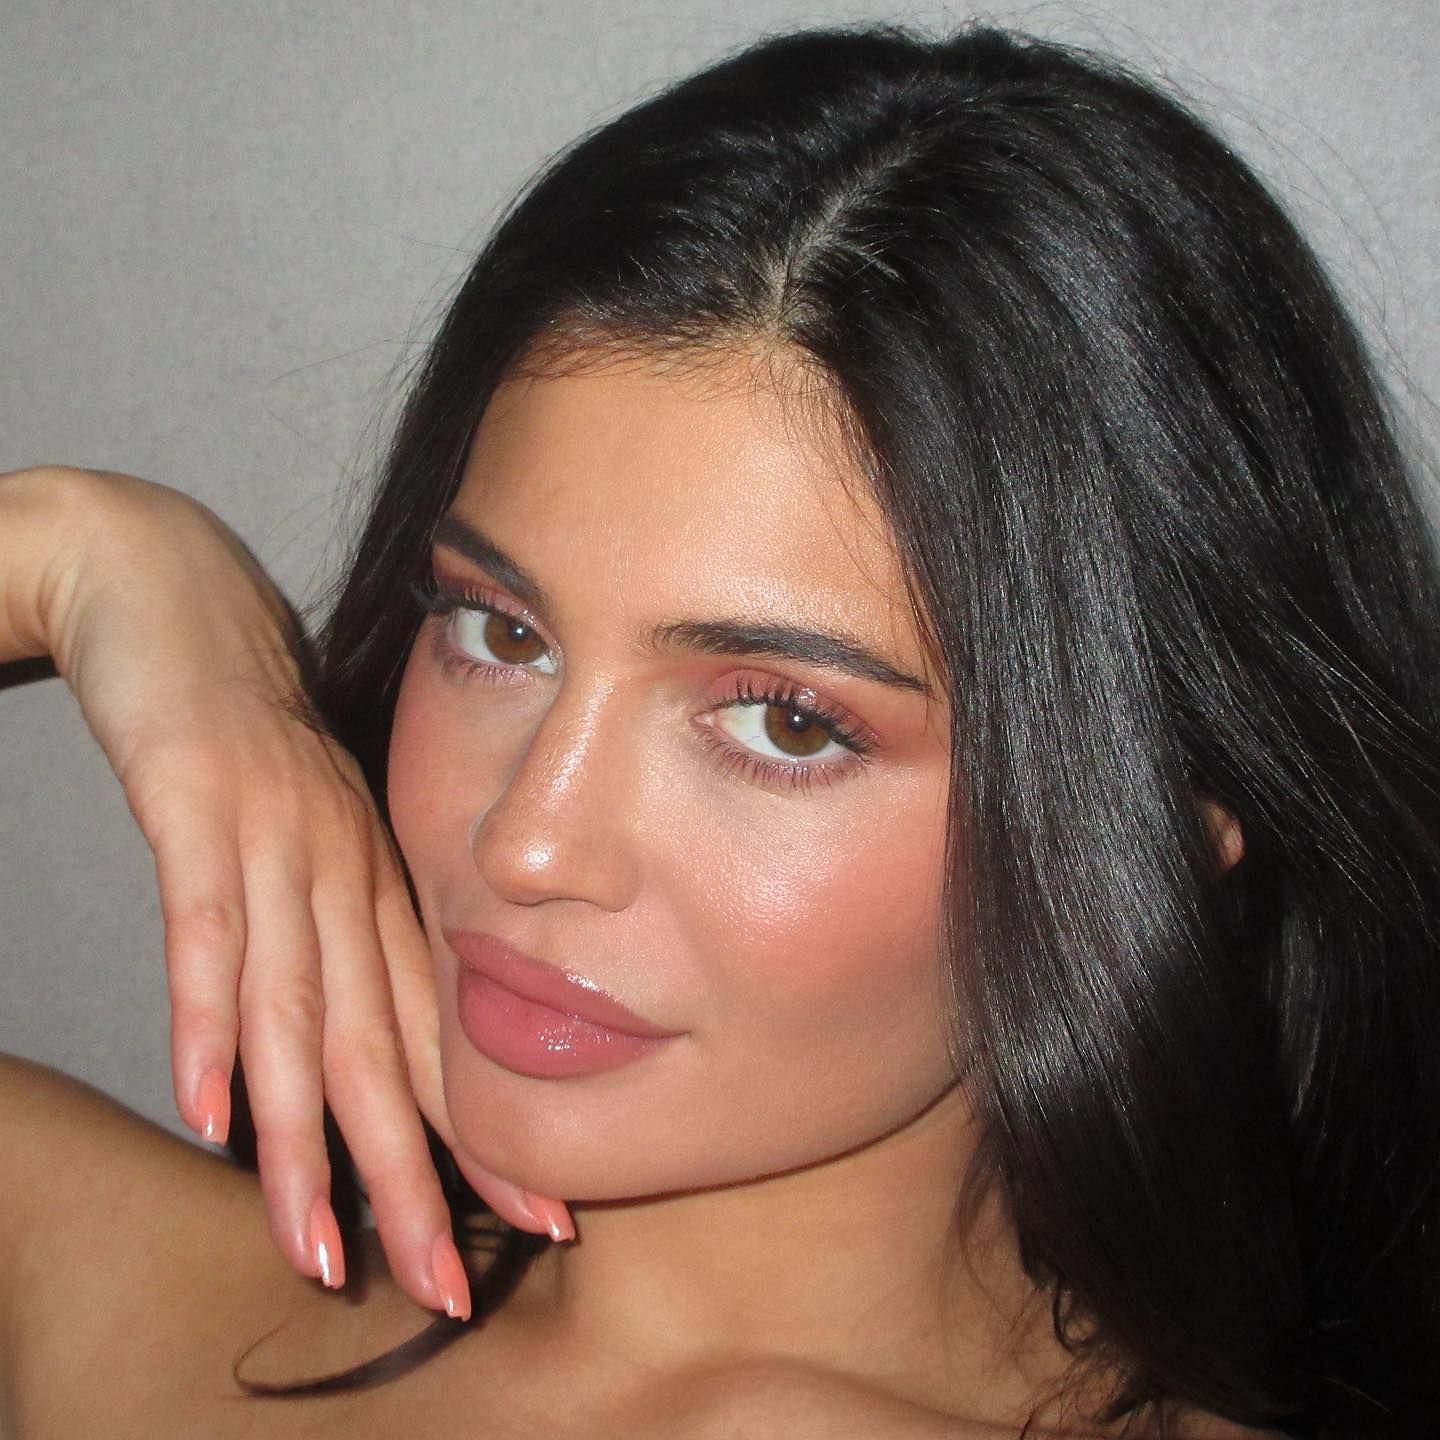 How old is Kylie Jenner?